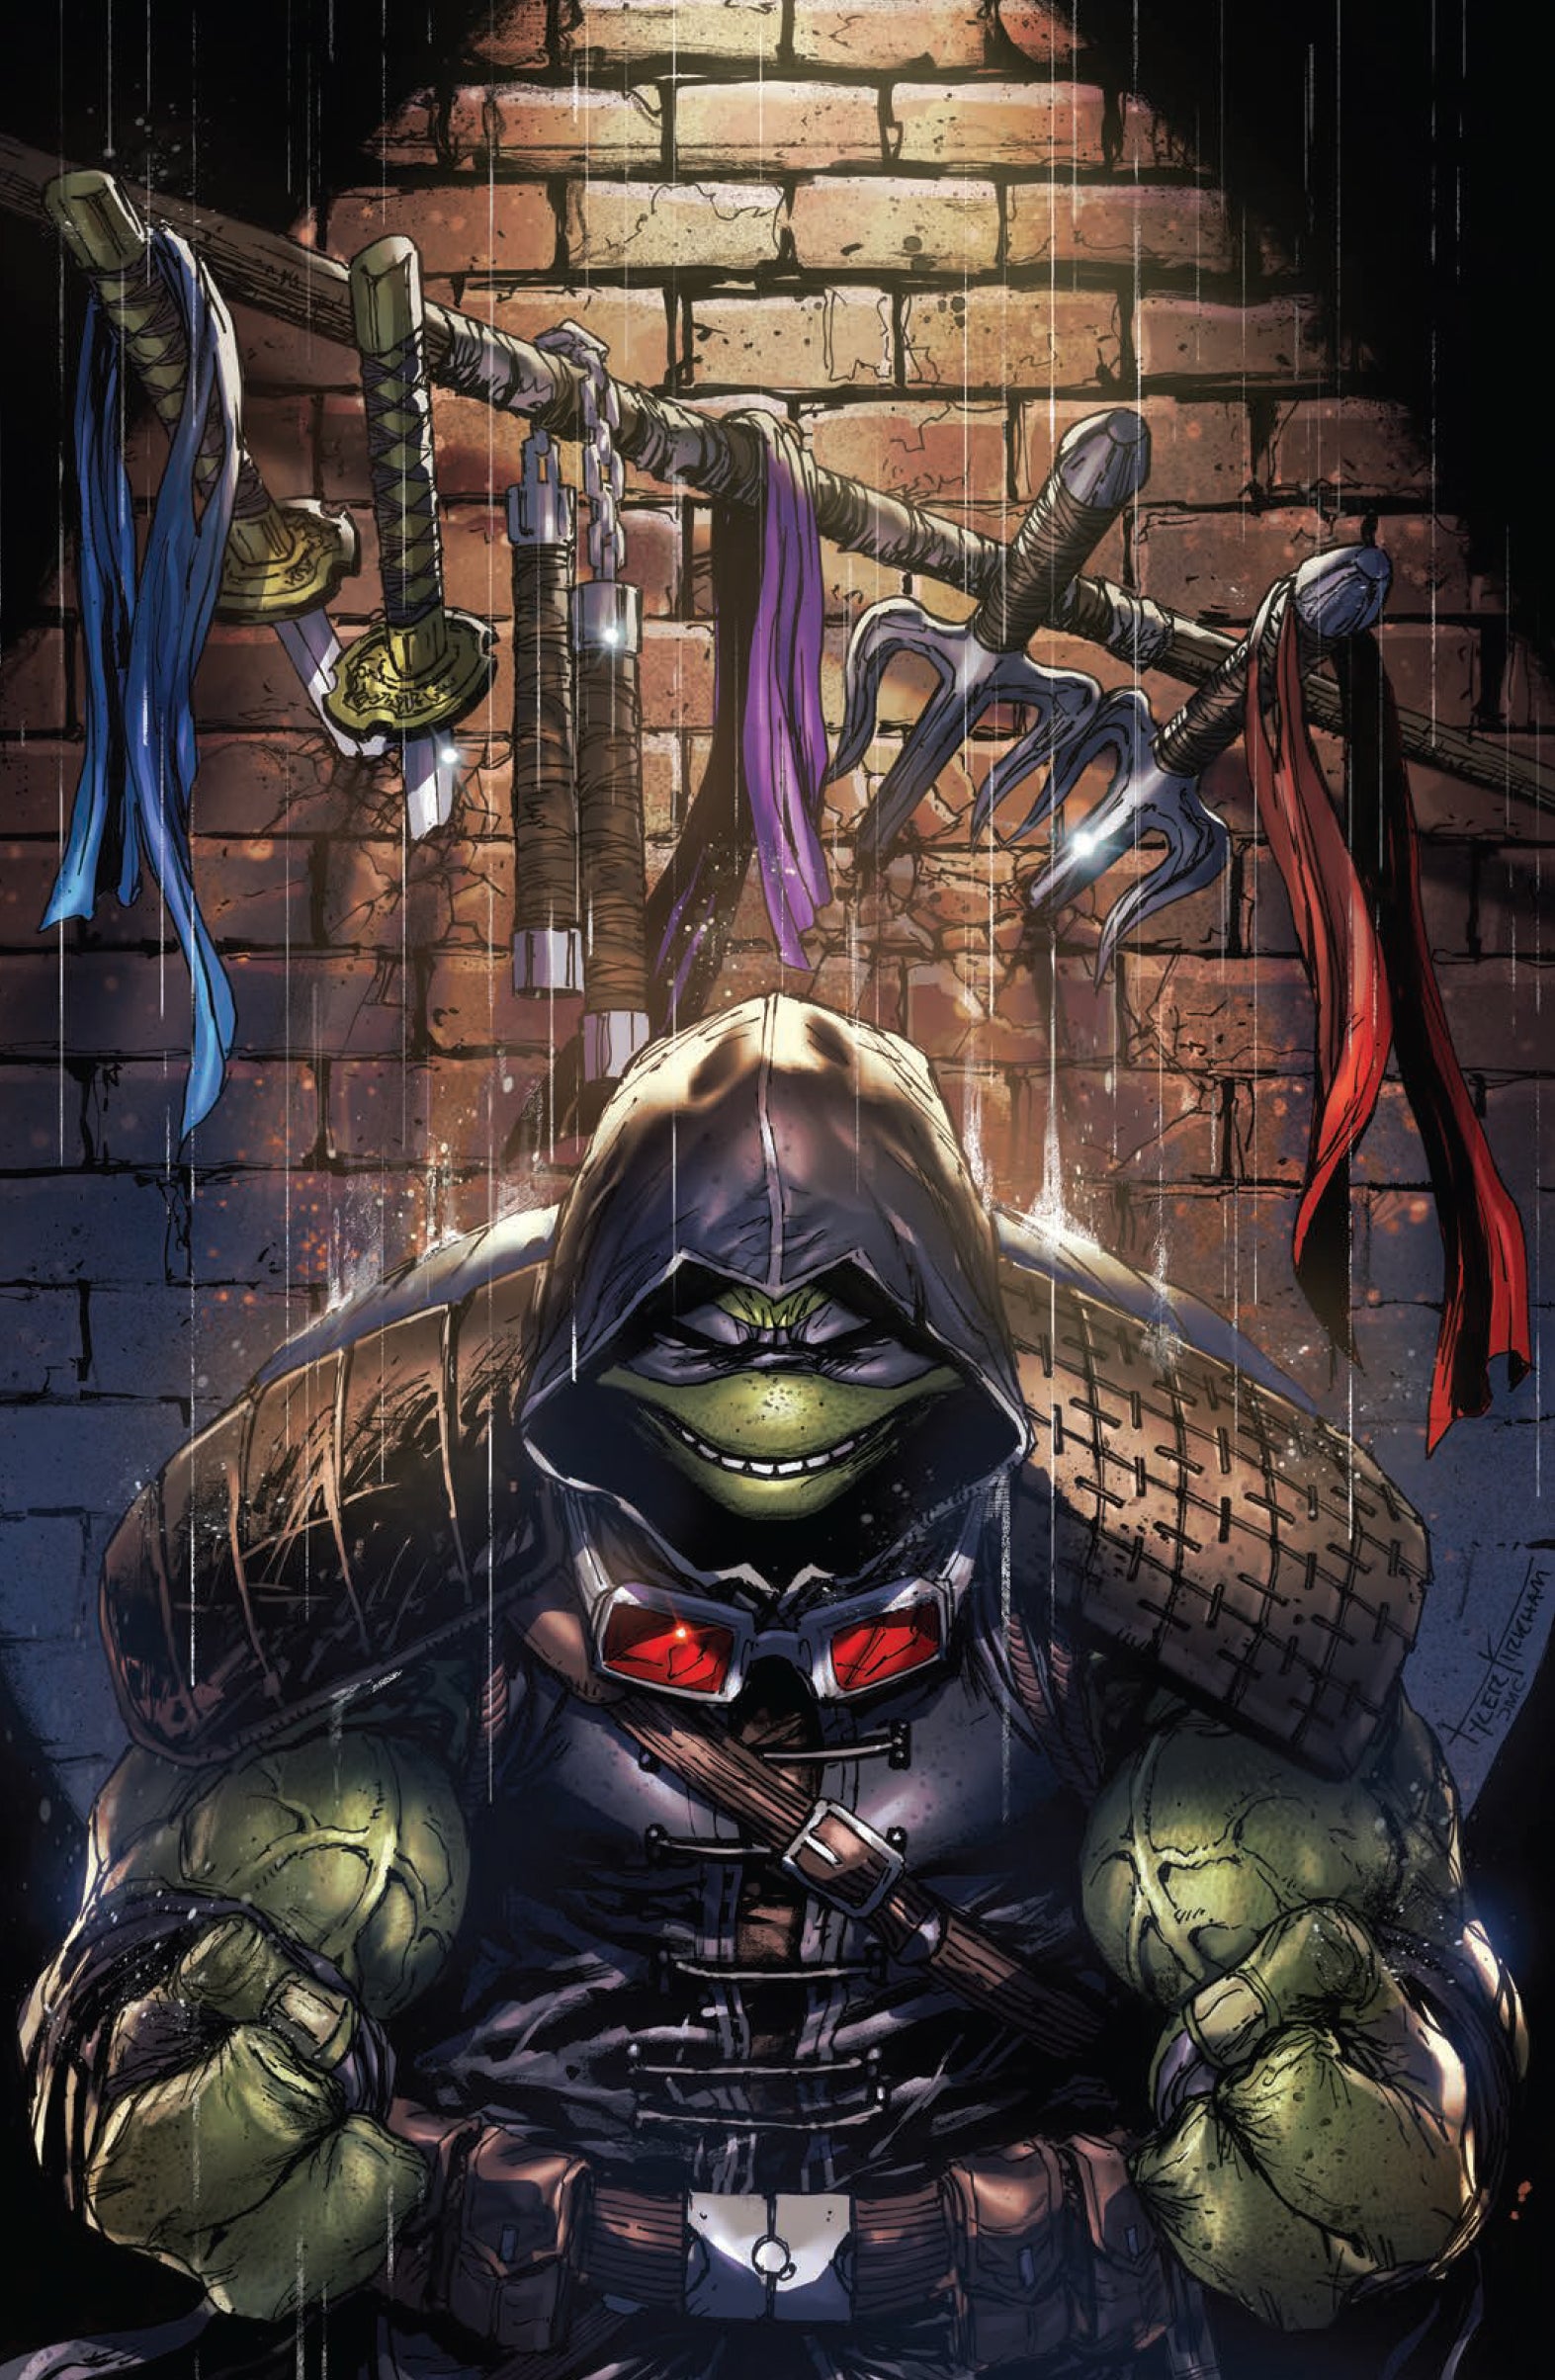 The One Stop Shop Comics & Games TMNT The Last Ronin #5 (Of 5) Exclusive Variant Set of 3 (04/27/2022) IDW PUBLISHING